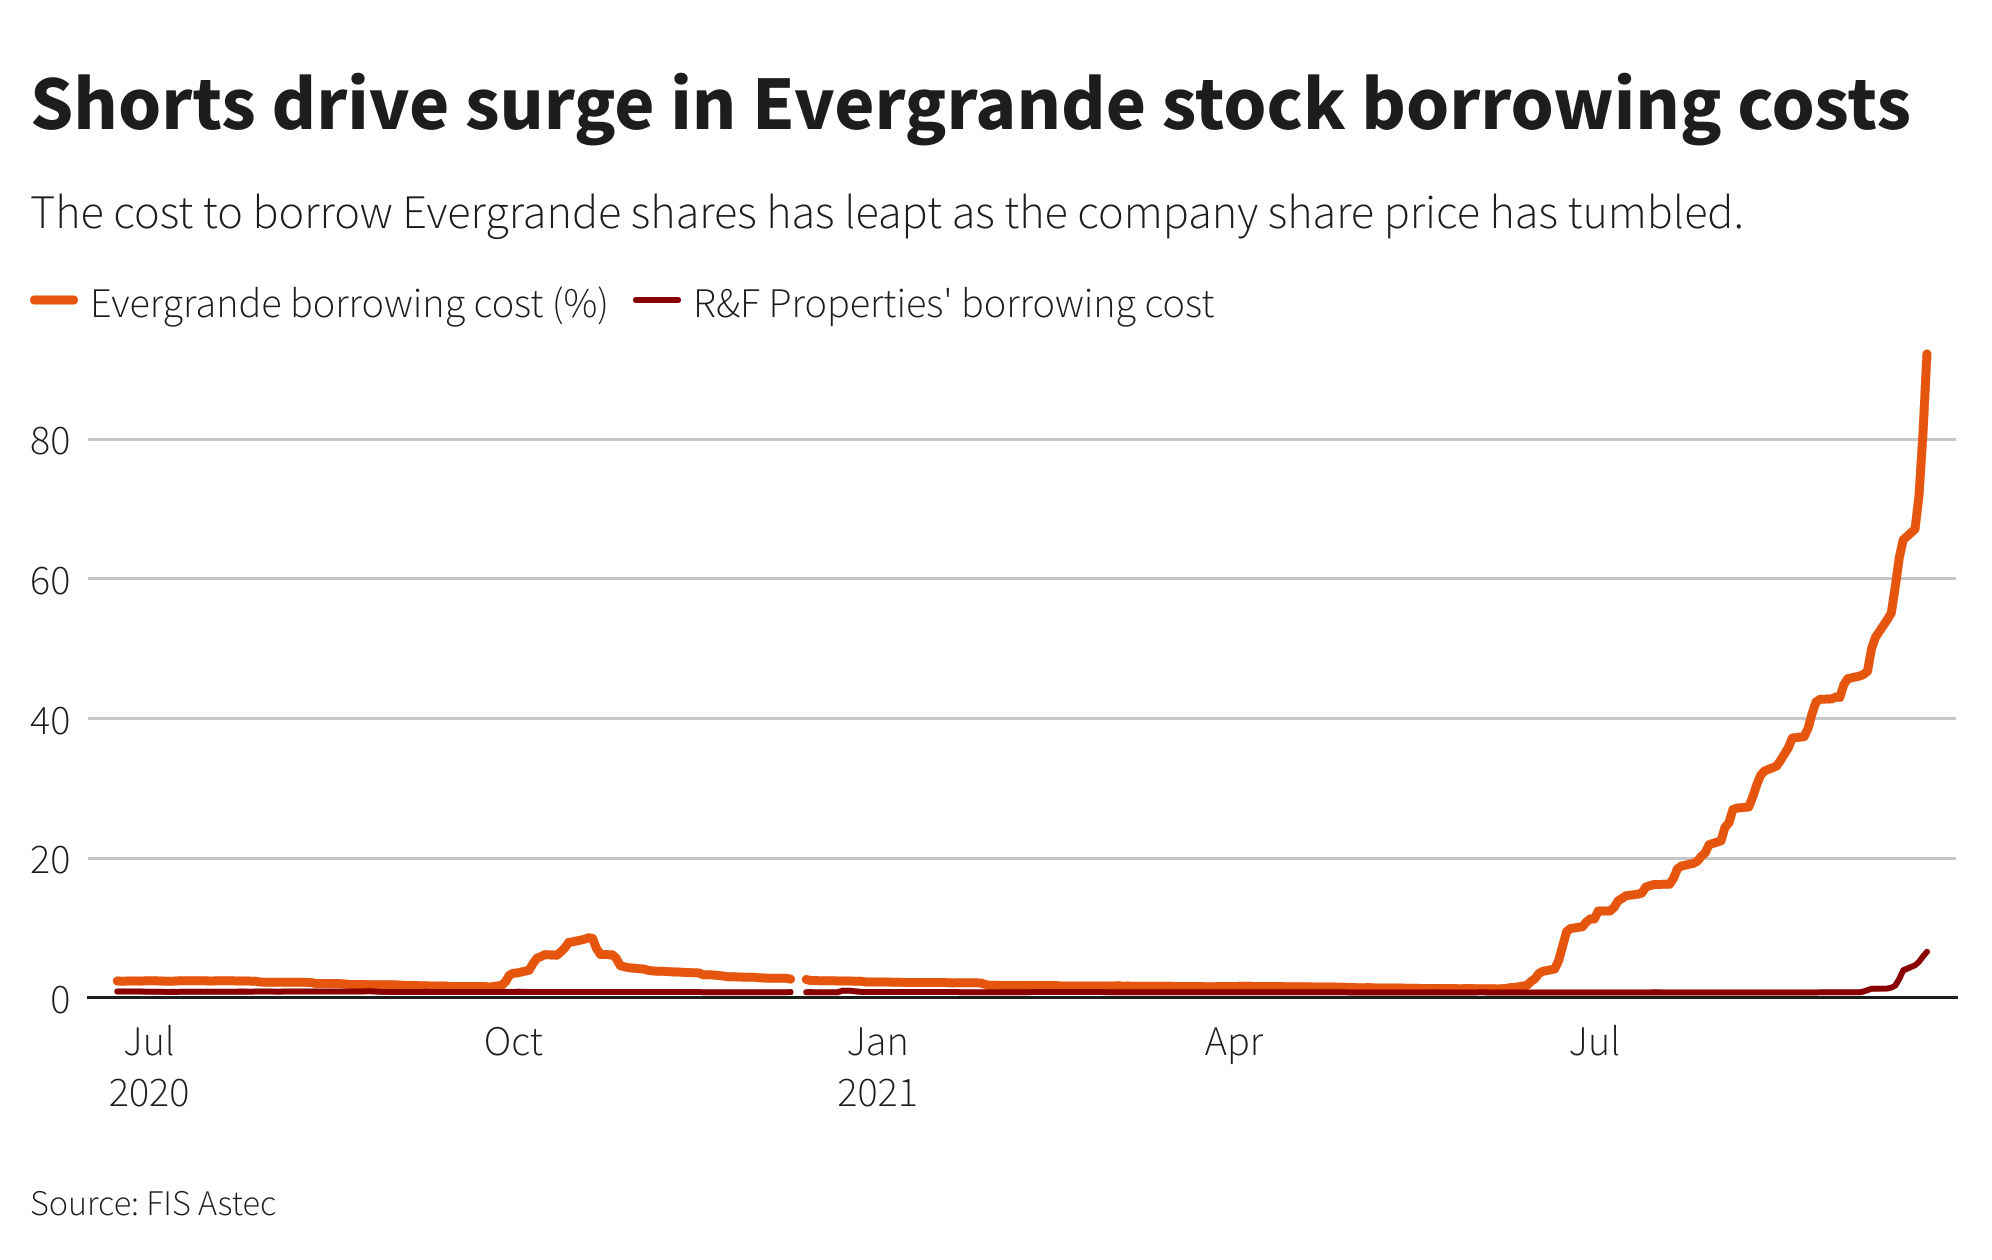 Shorts drive surge in borrowing costs for Evergrande stock